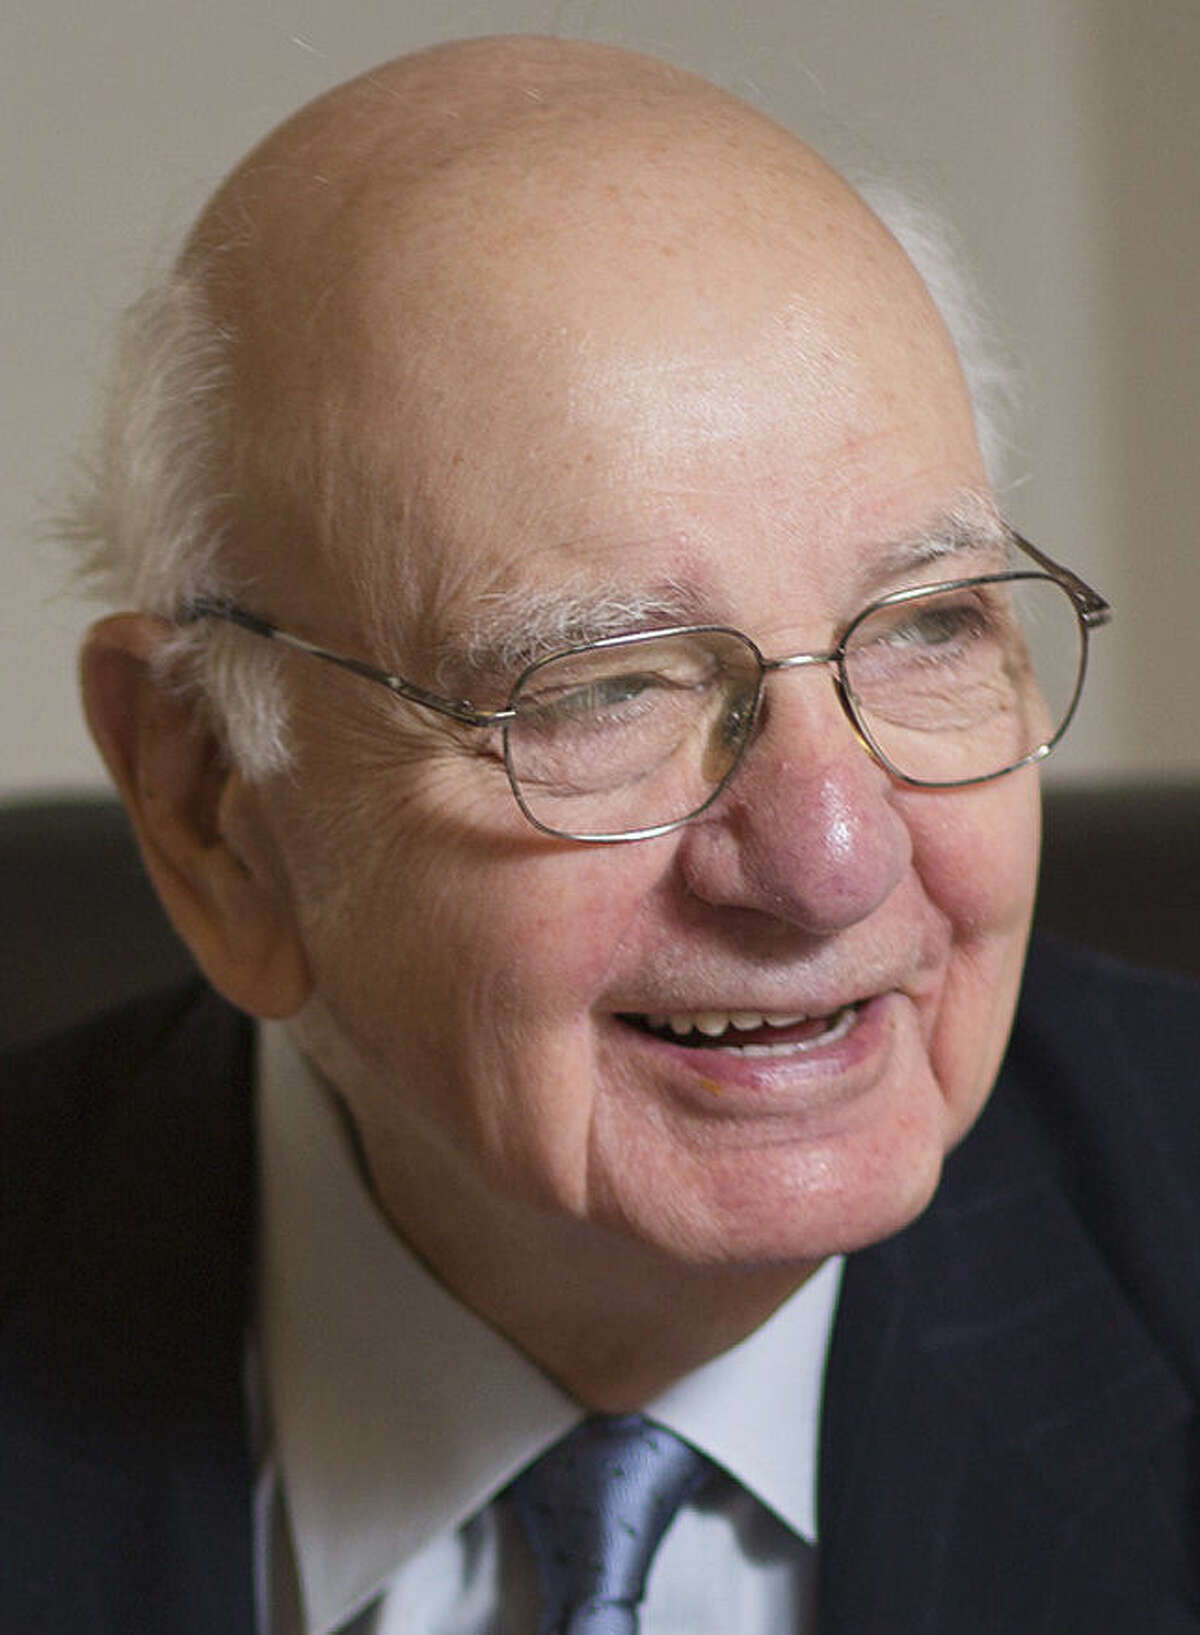 The Volcker Rule is named for former Federal Reserve Chairman Paul Volcker.